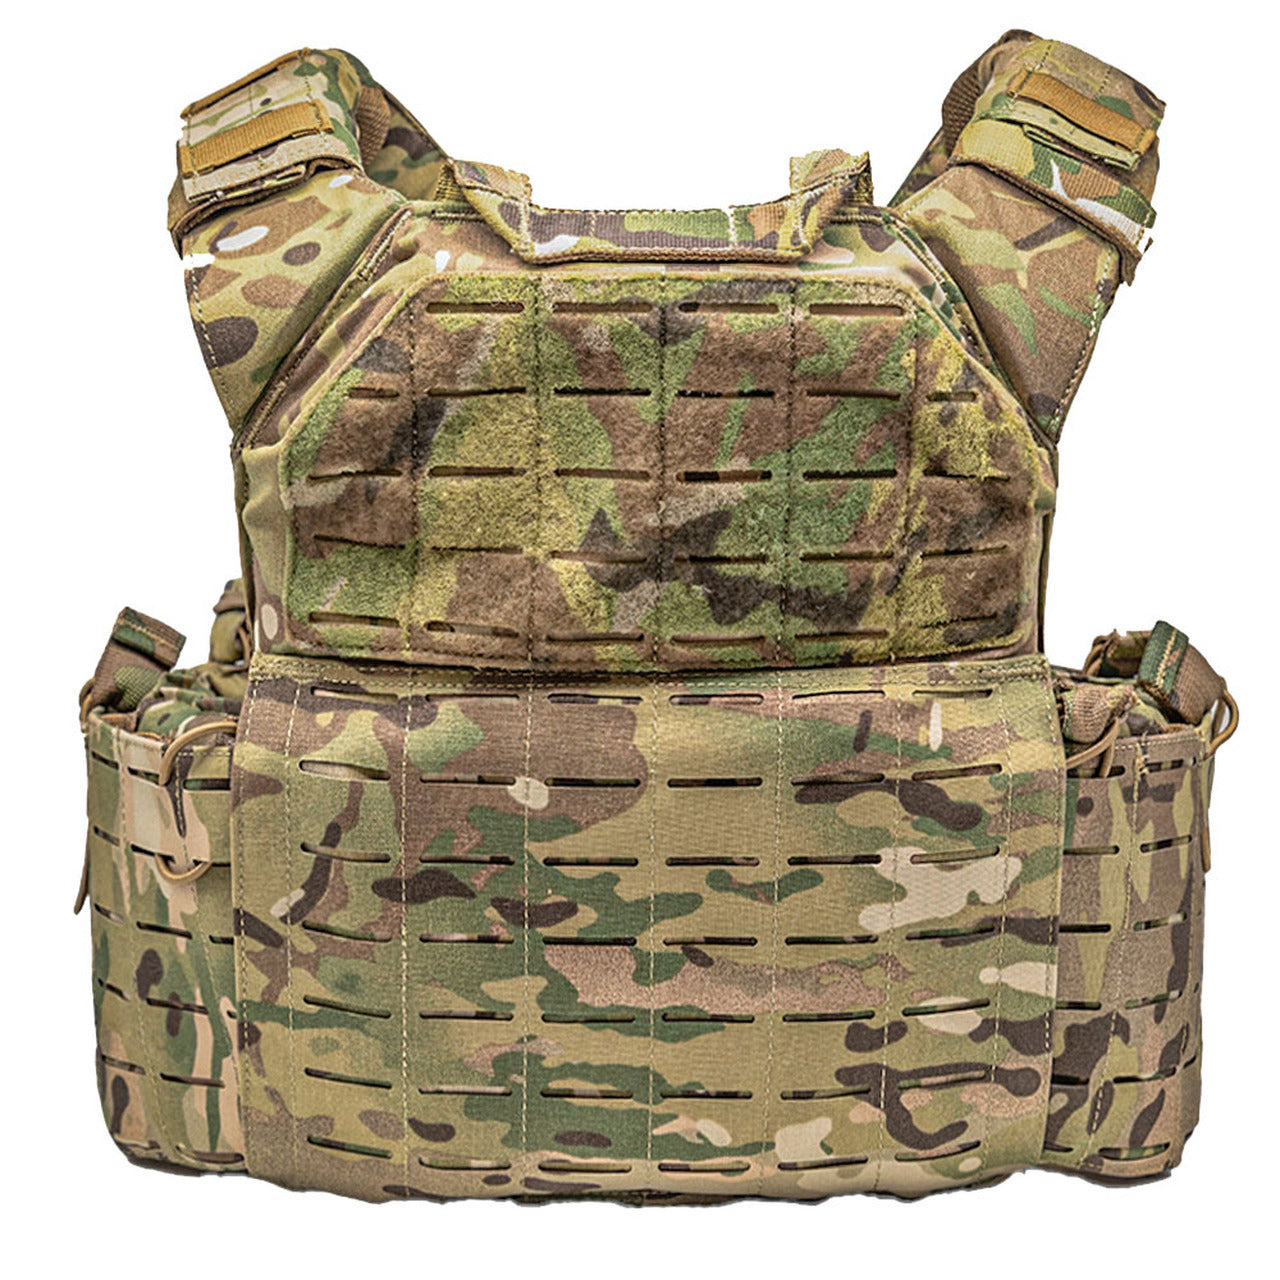 A Shellback Tactical Rampage 2.0 Plate Carrier on a white background.